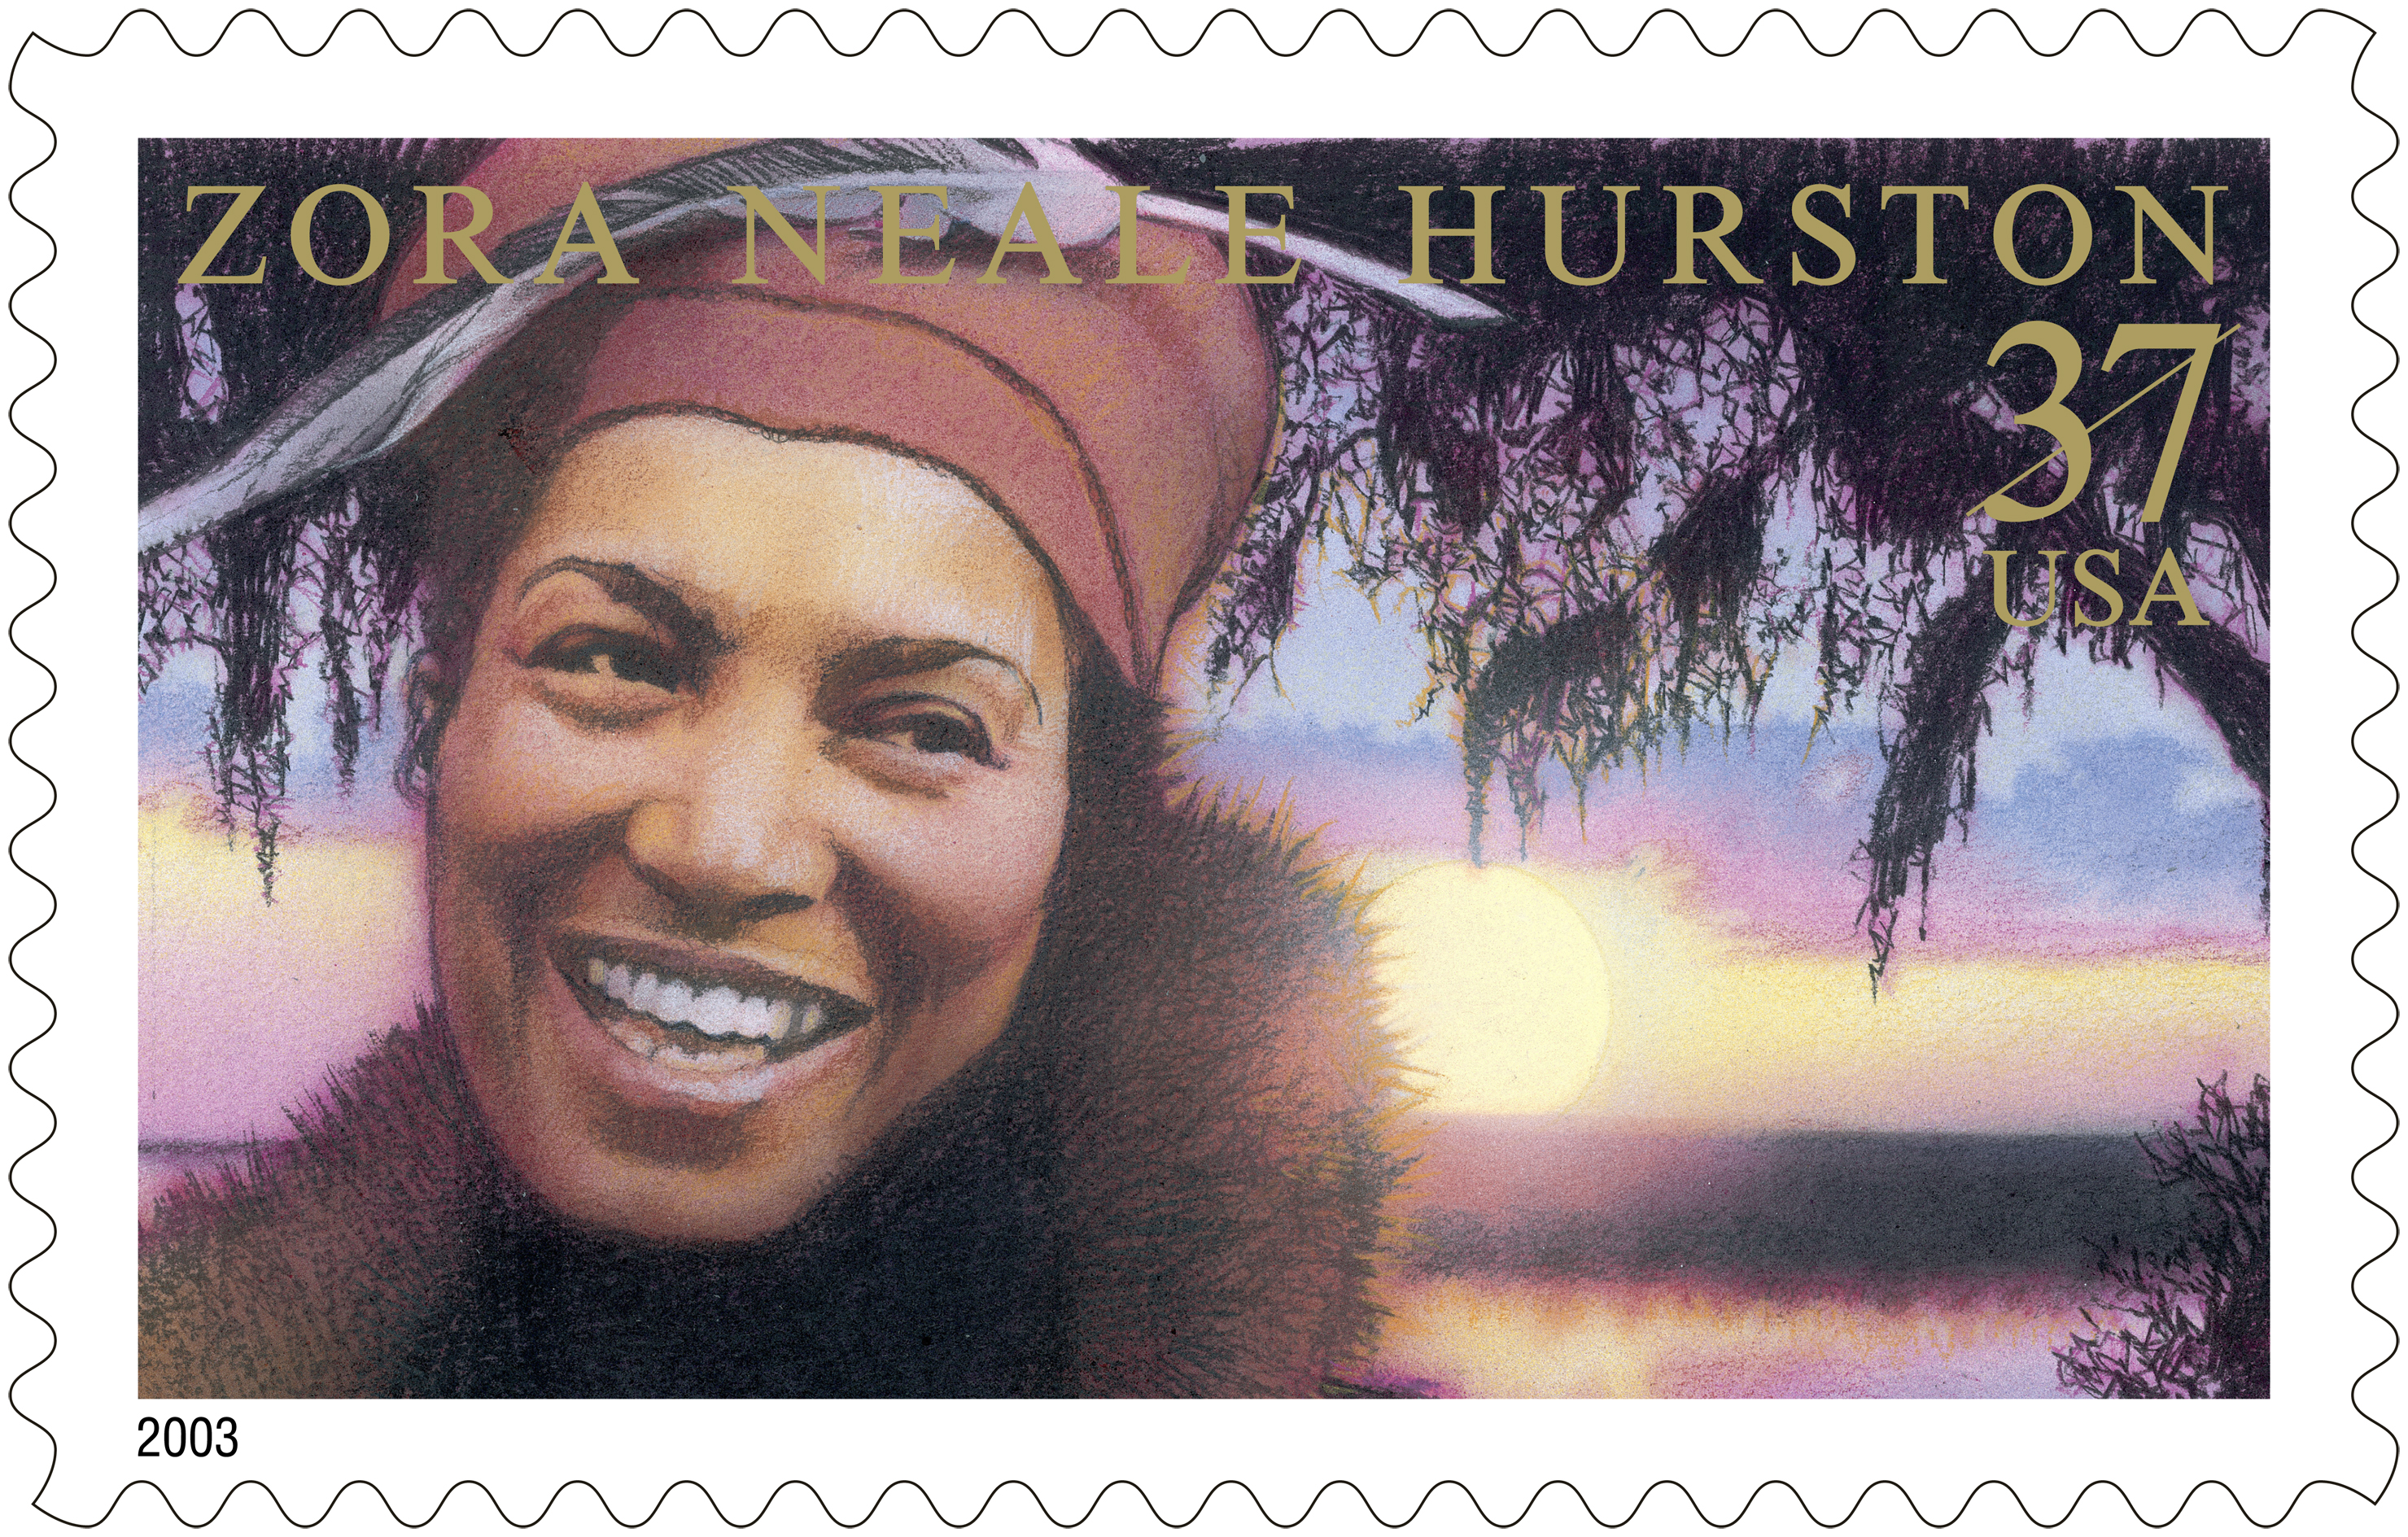 A novelist, folklorist, and anthropologist, Zora Neale Hurston is remembere...